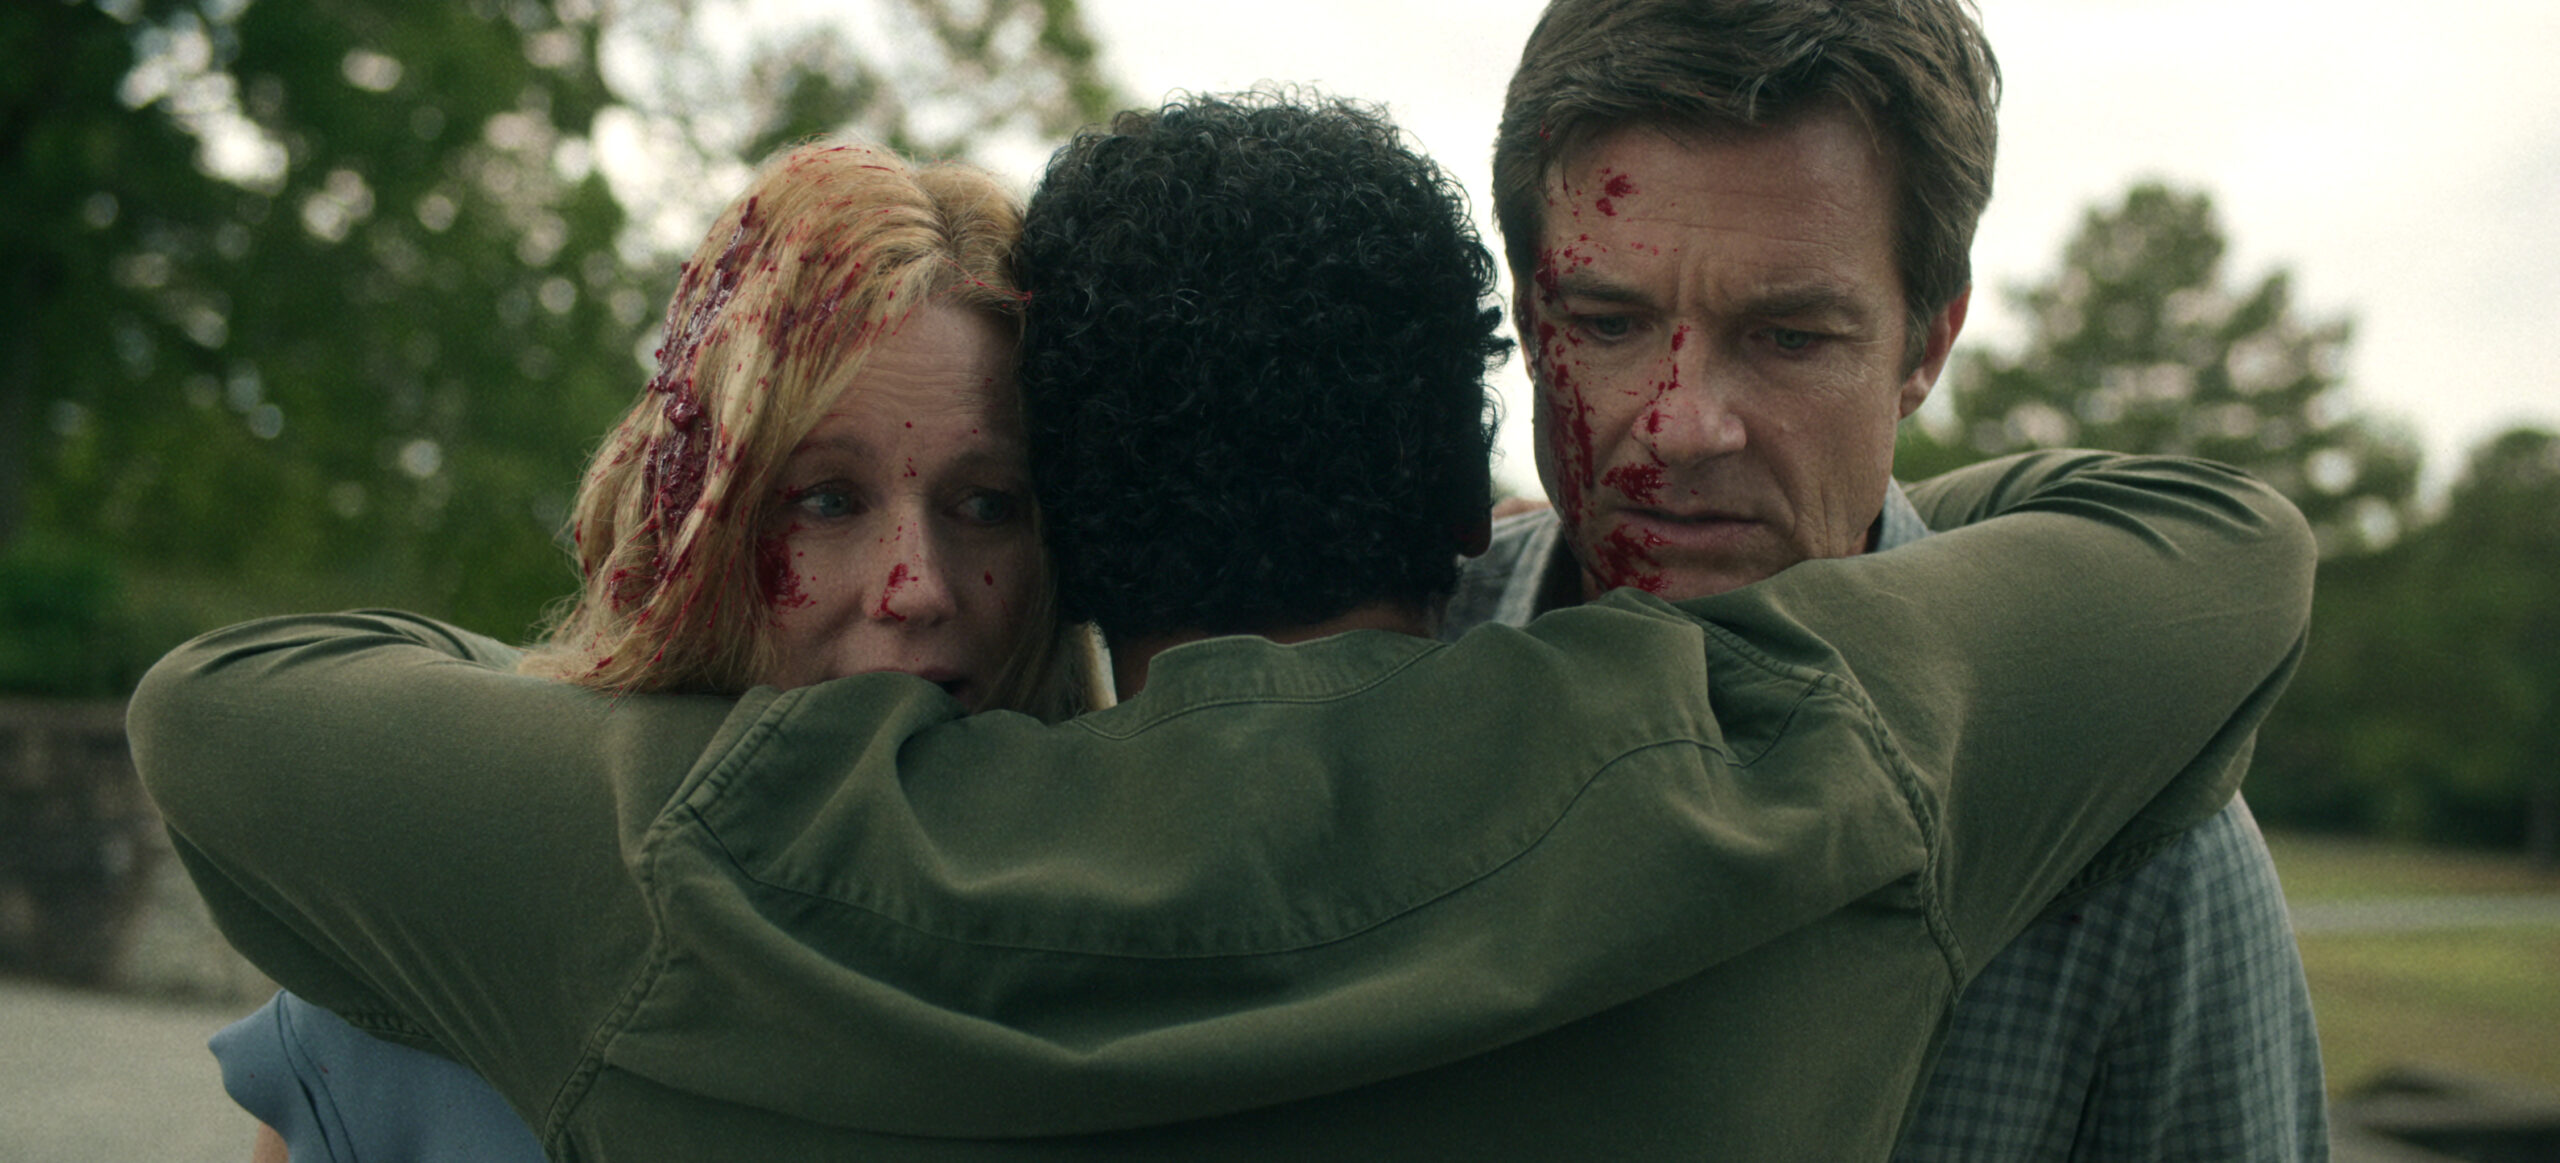 Jason Bateman Is Bloodied And Terrified In First Look At Ozark Season 4.